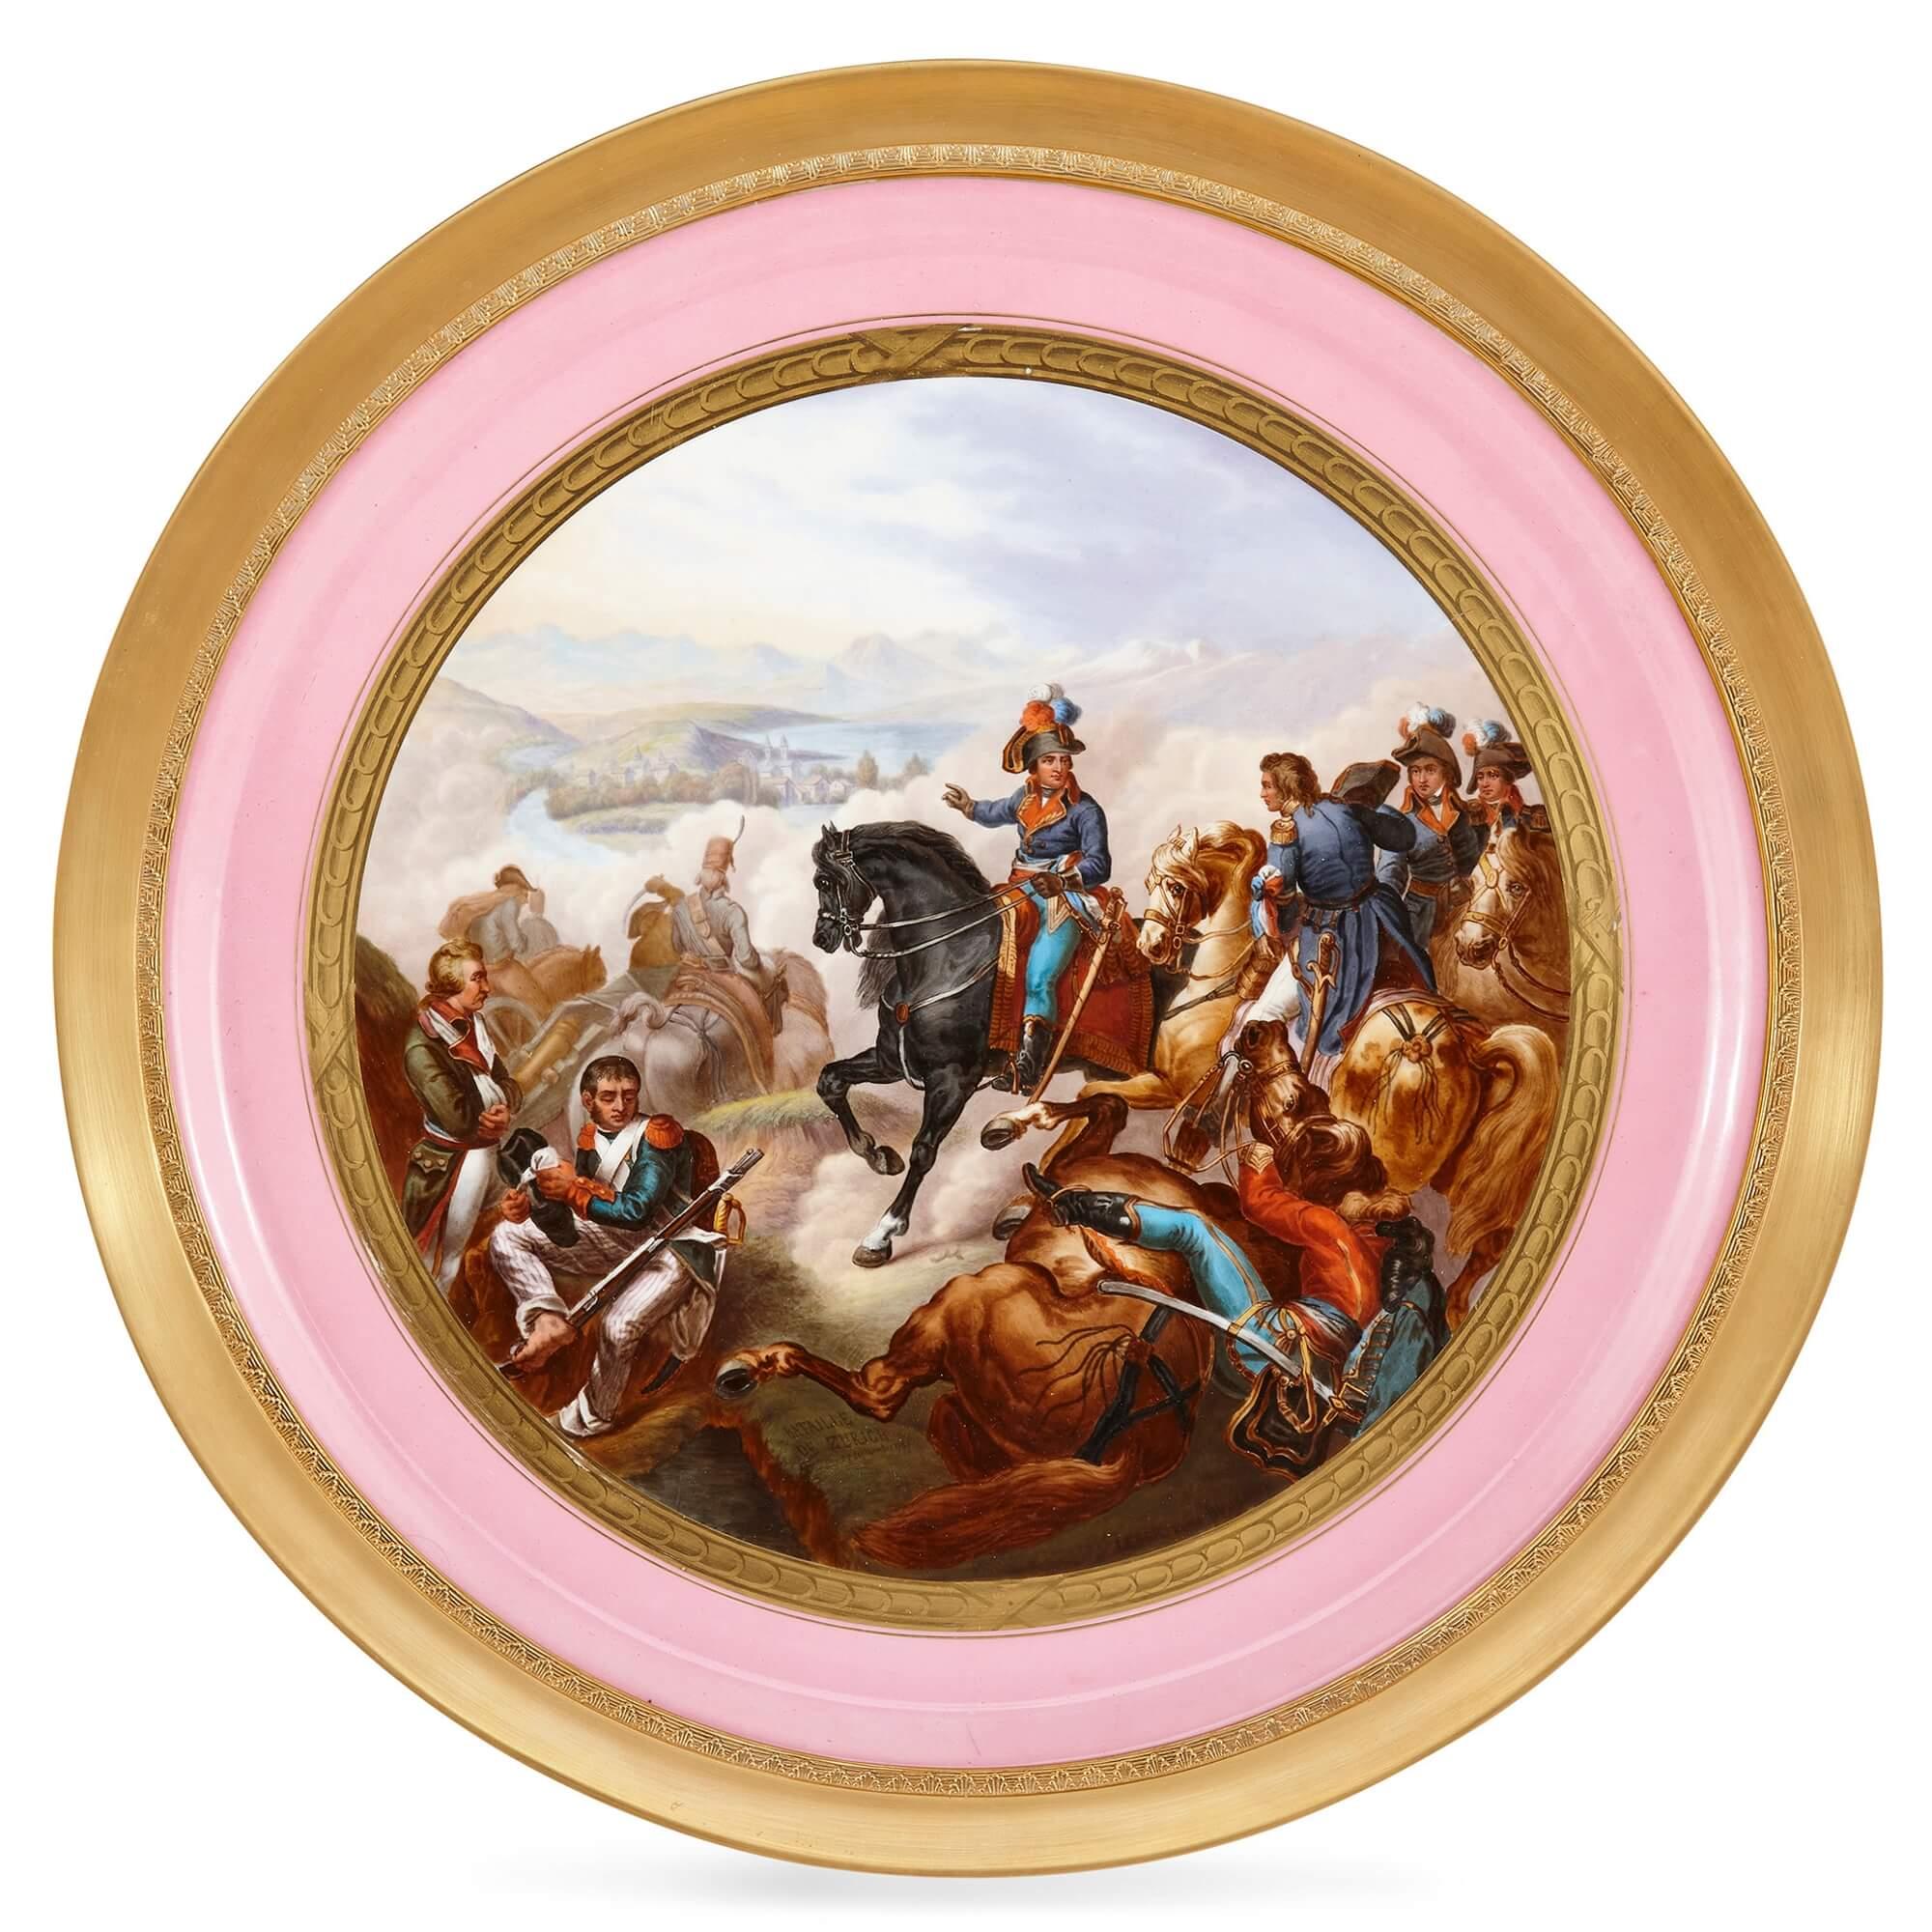 A large pair of Sevres style Napoleonic painted porcelain chargers
French, 19th century
Measures: 2cm high x 45cm in diameter, frames 51cm diameter

Excellently painted and finely crafted, these unusually grand Sevres style painted porcelain